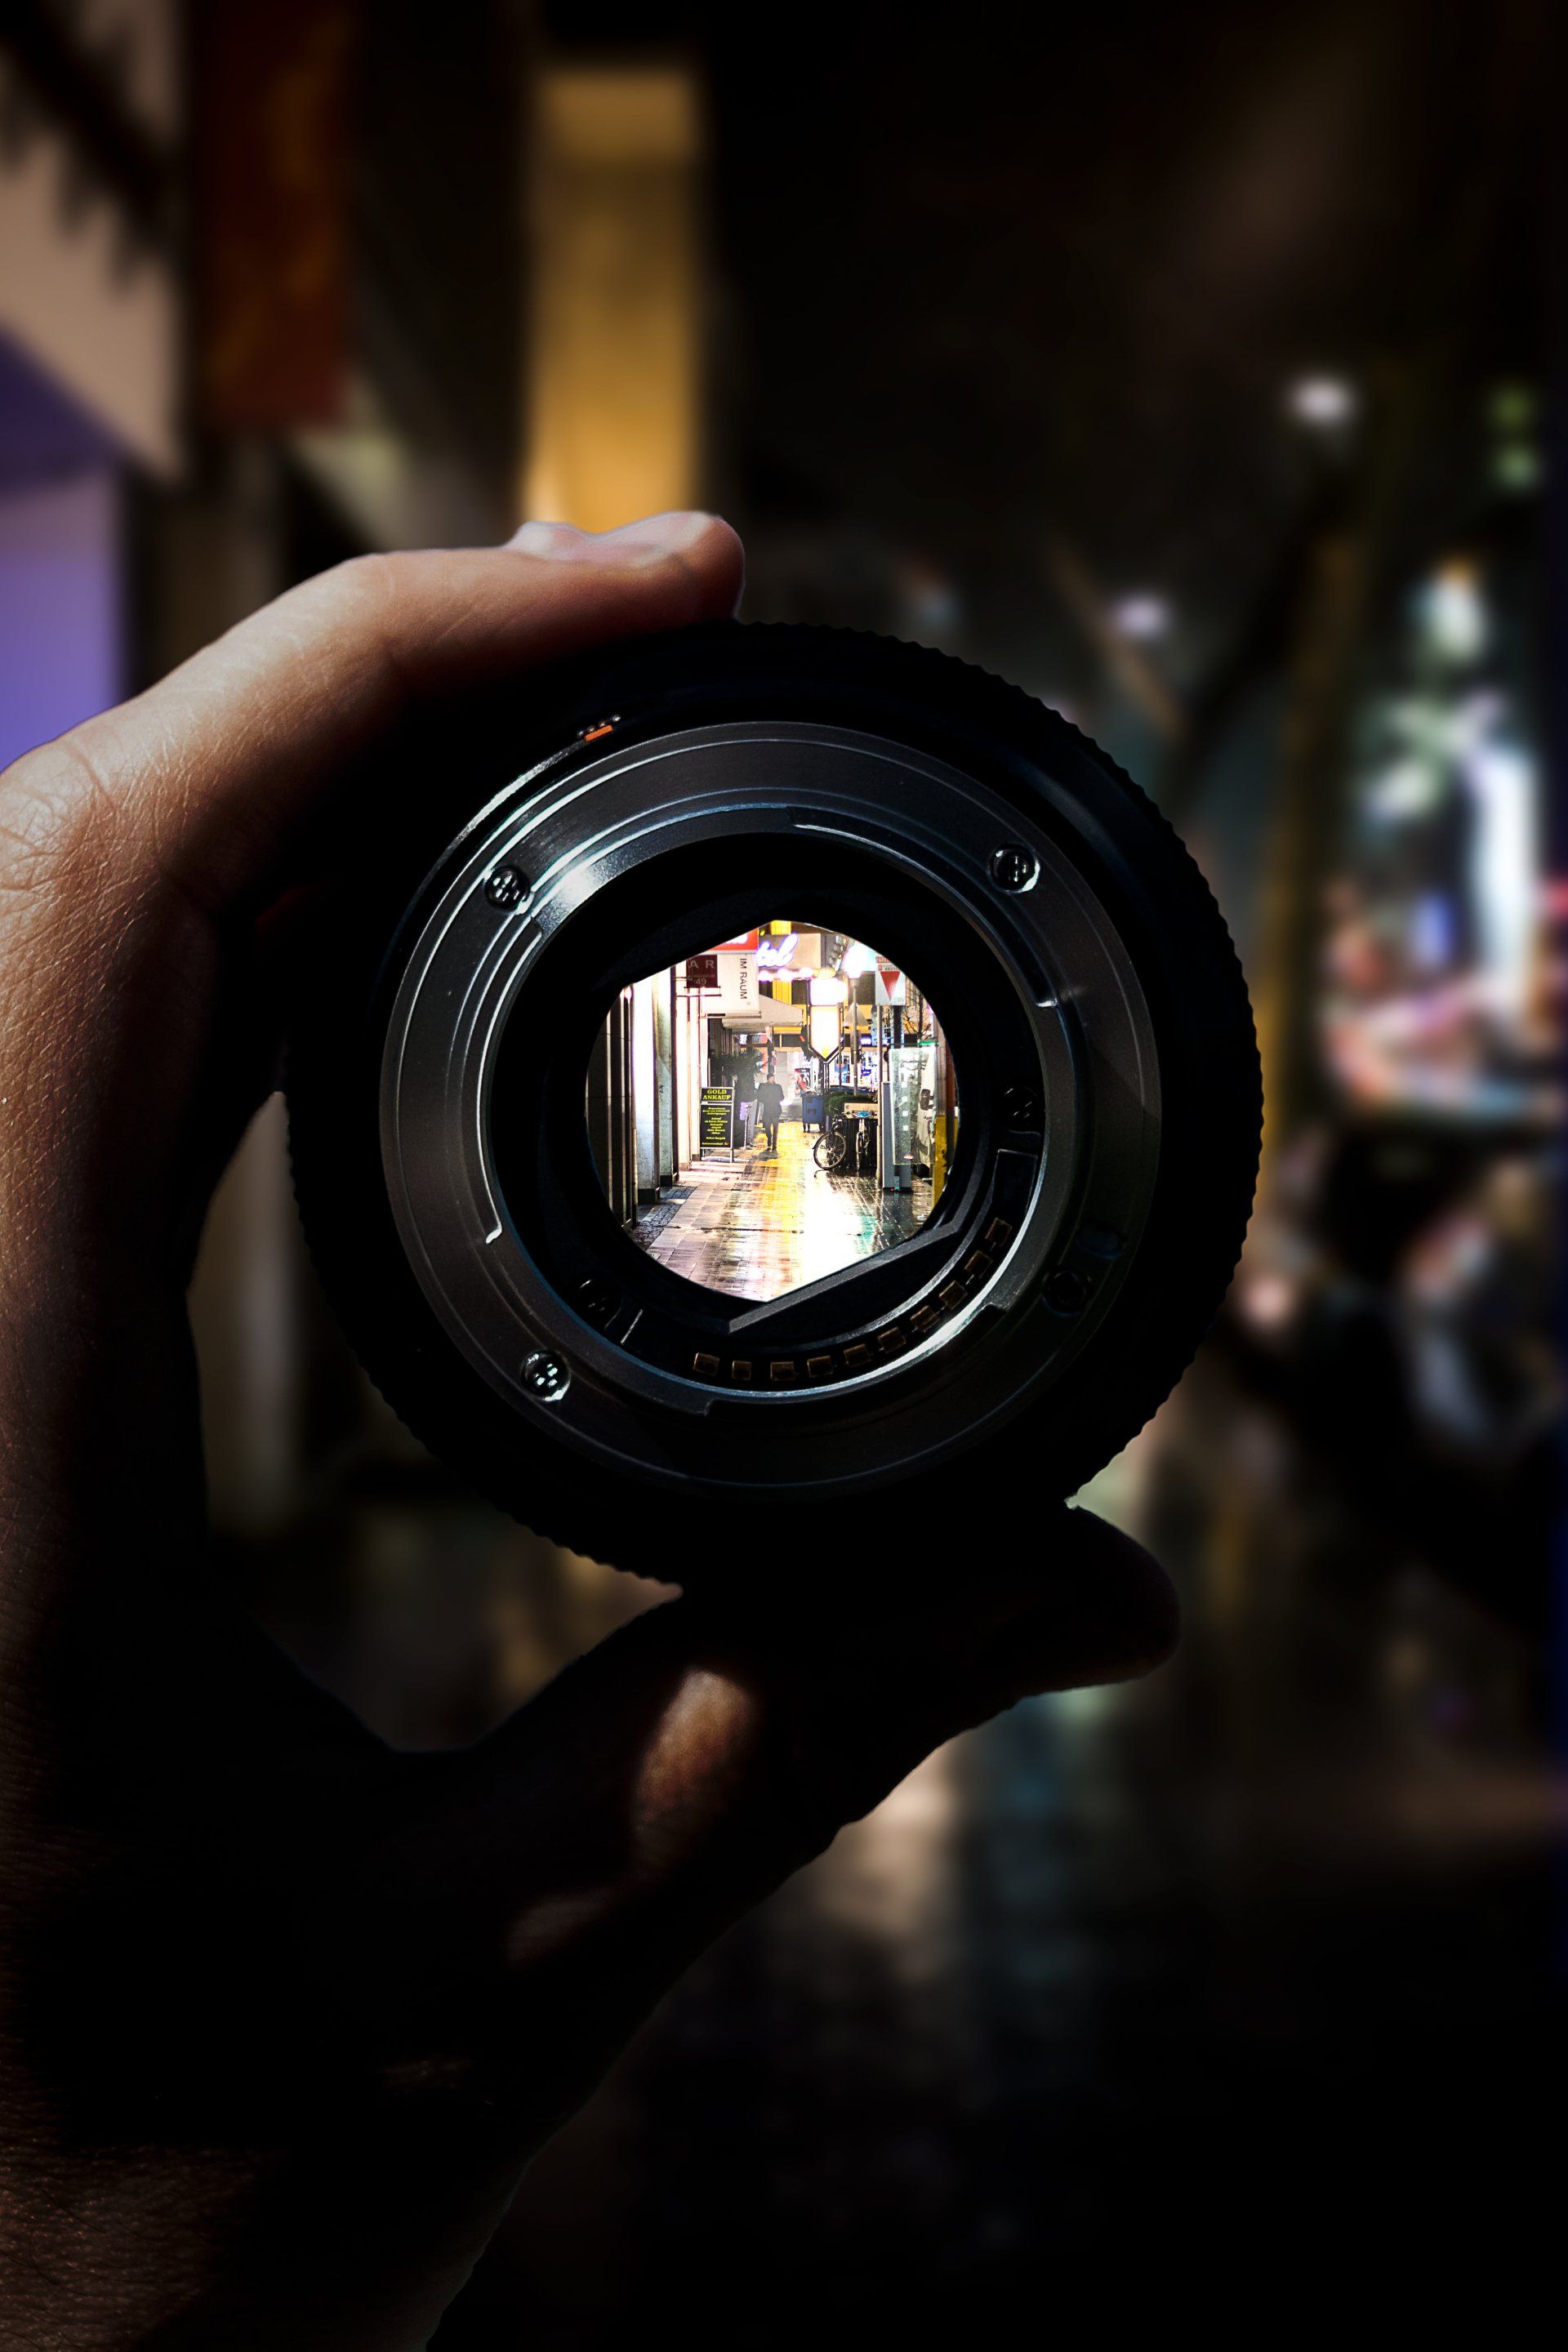 A person is holding a camera lens in their hand and looking through it.